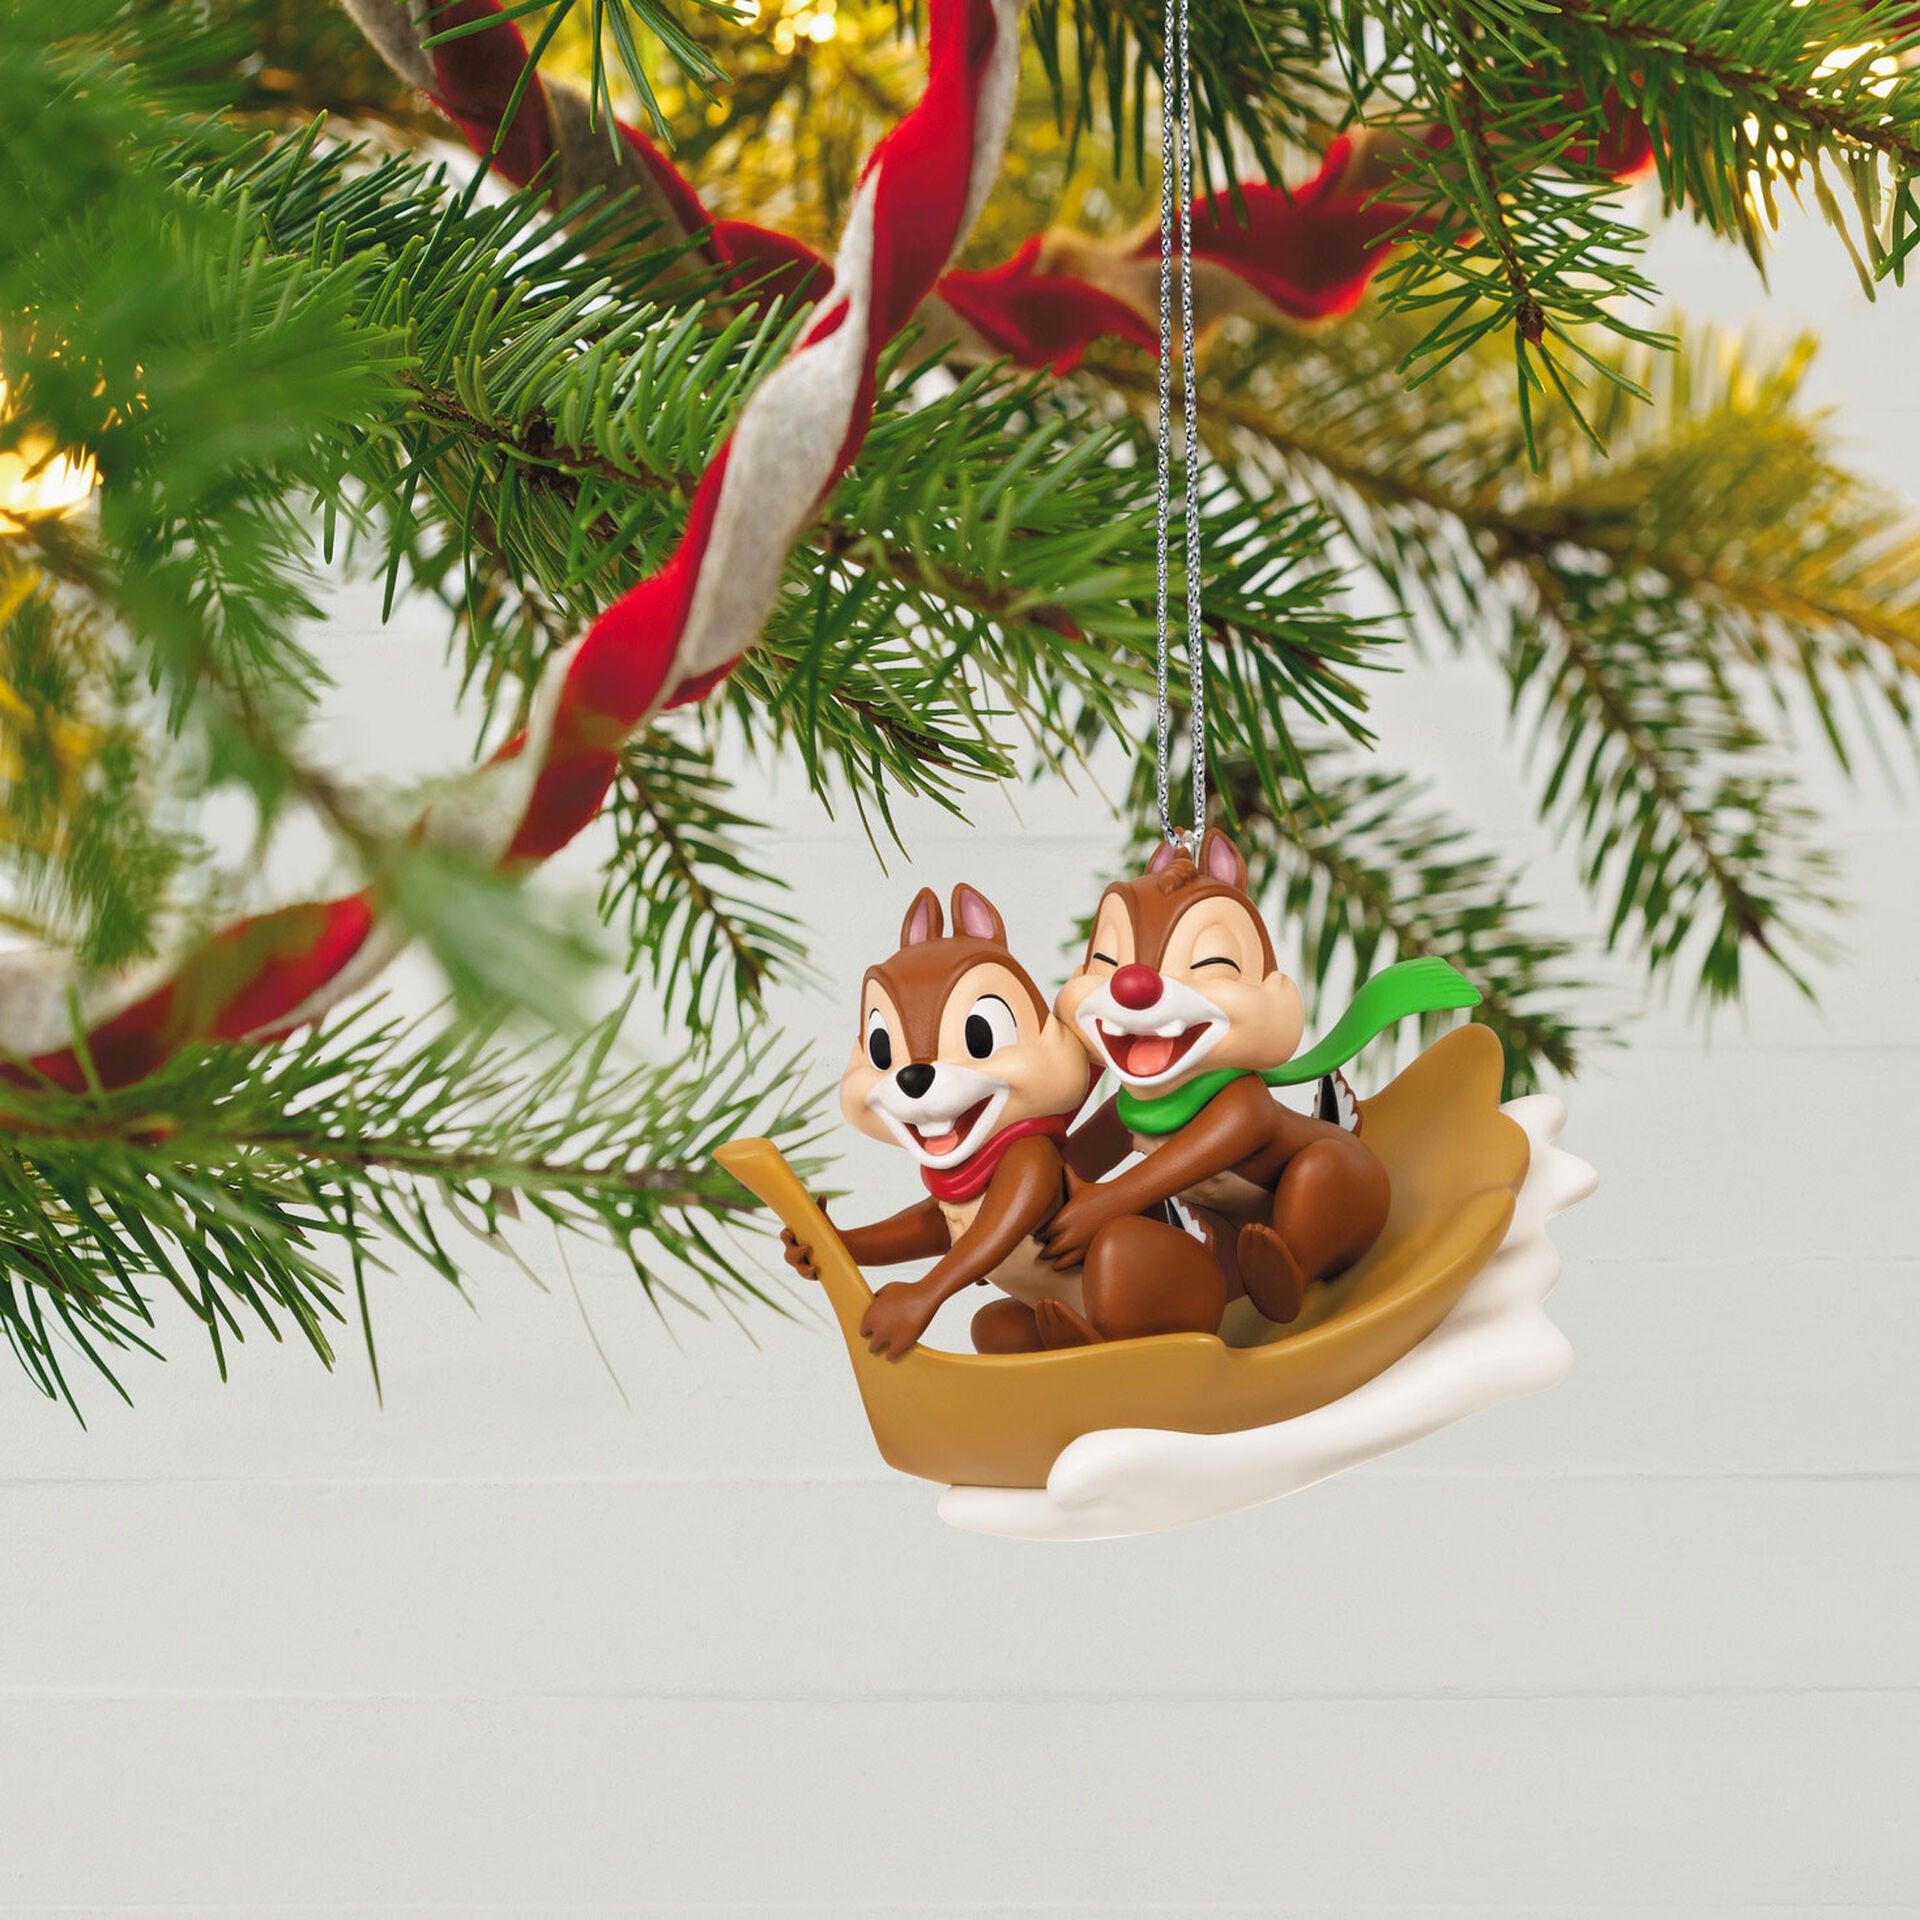 Disney Chip and Dale Snow Much Fun! Ornament